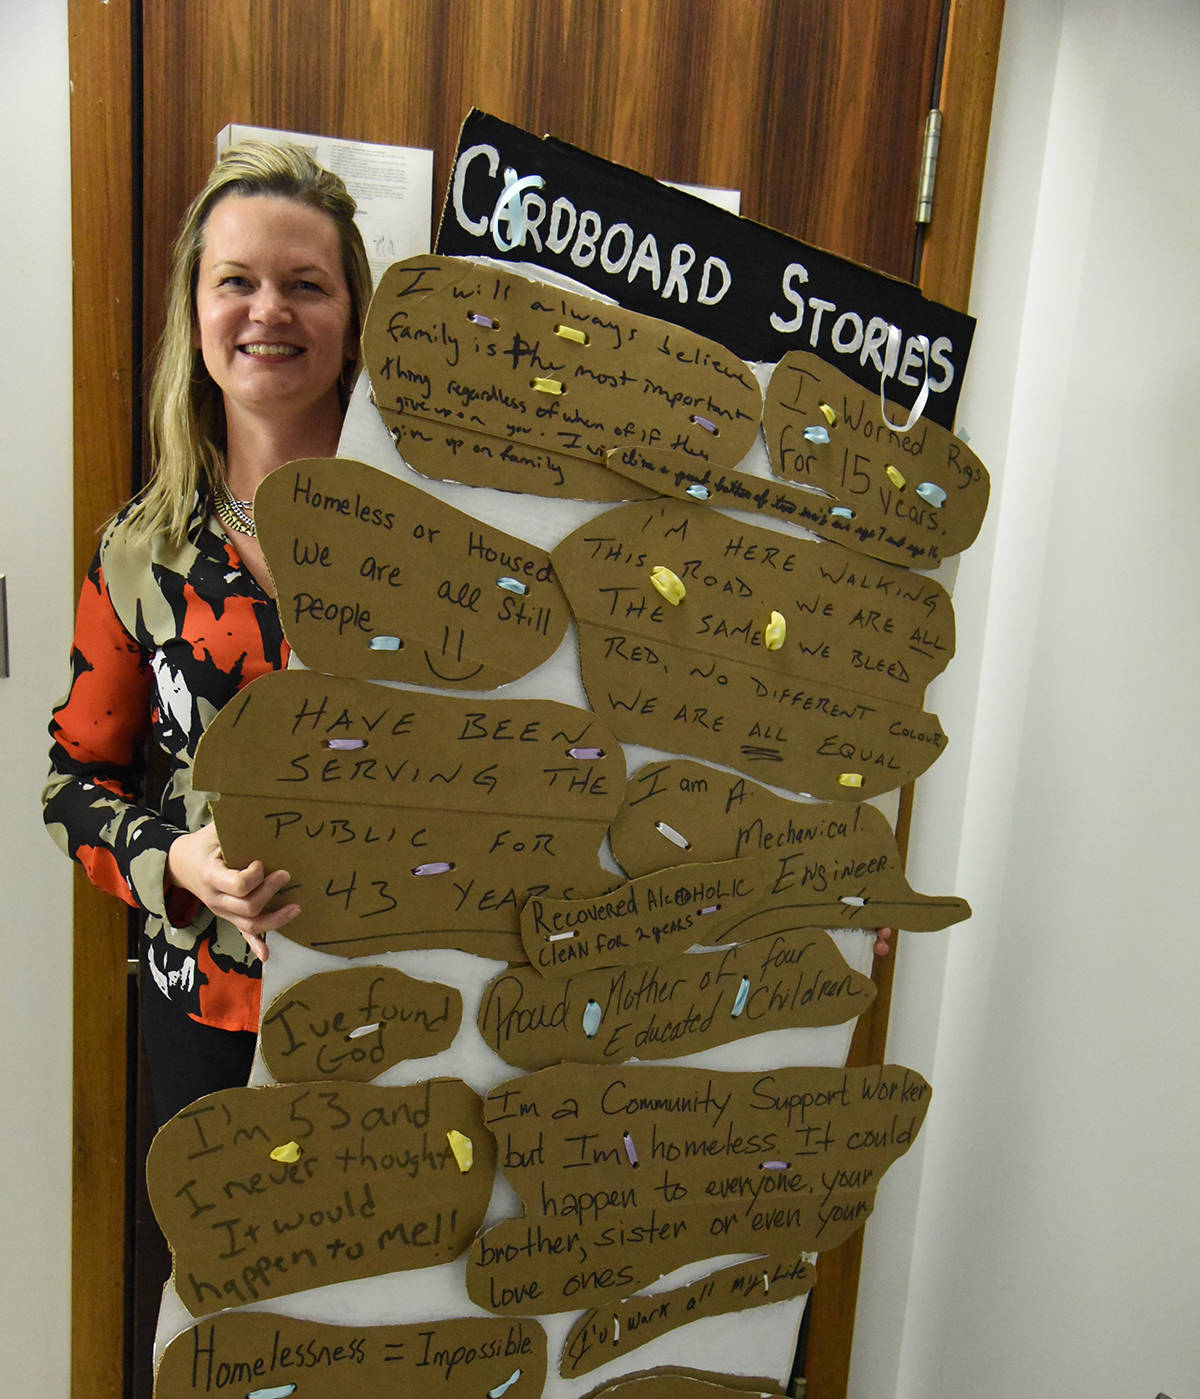 SHARING THEIR STORIES - Christine Steward, executive director of the Canadian Mental Health Association of Central Alberta holds up the cardboard stories they collected from homeless people, in Red Deer at an event at The HUB on Ross. Michelle Falk/Red Deer Express